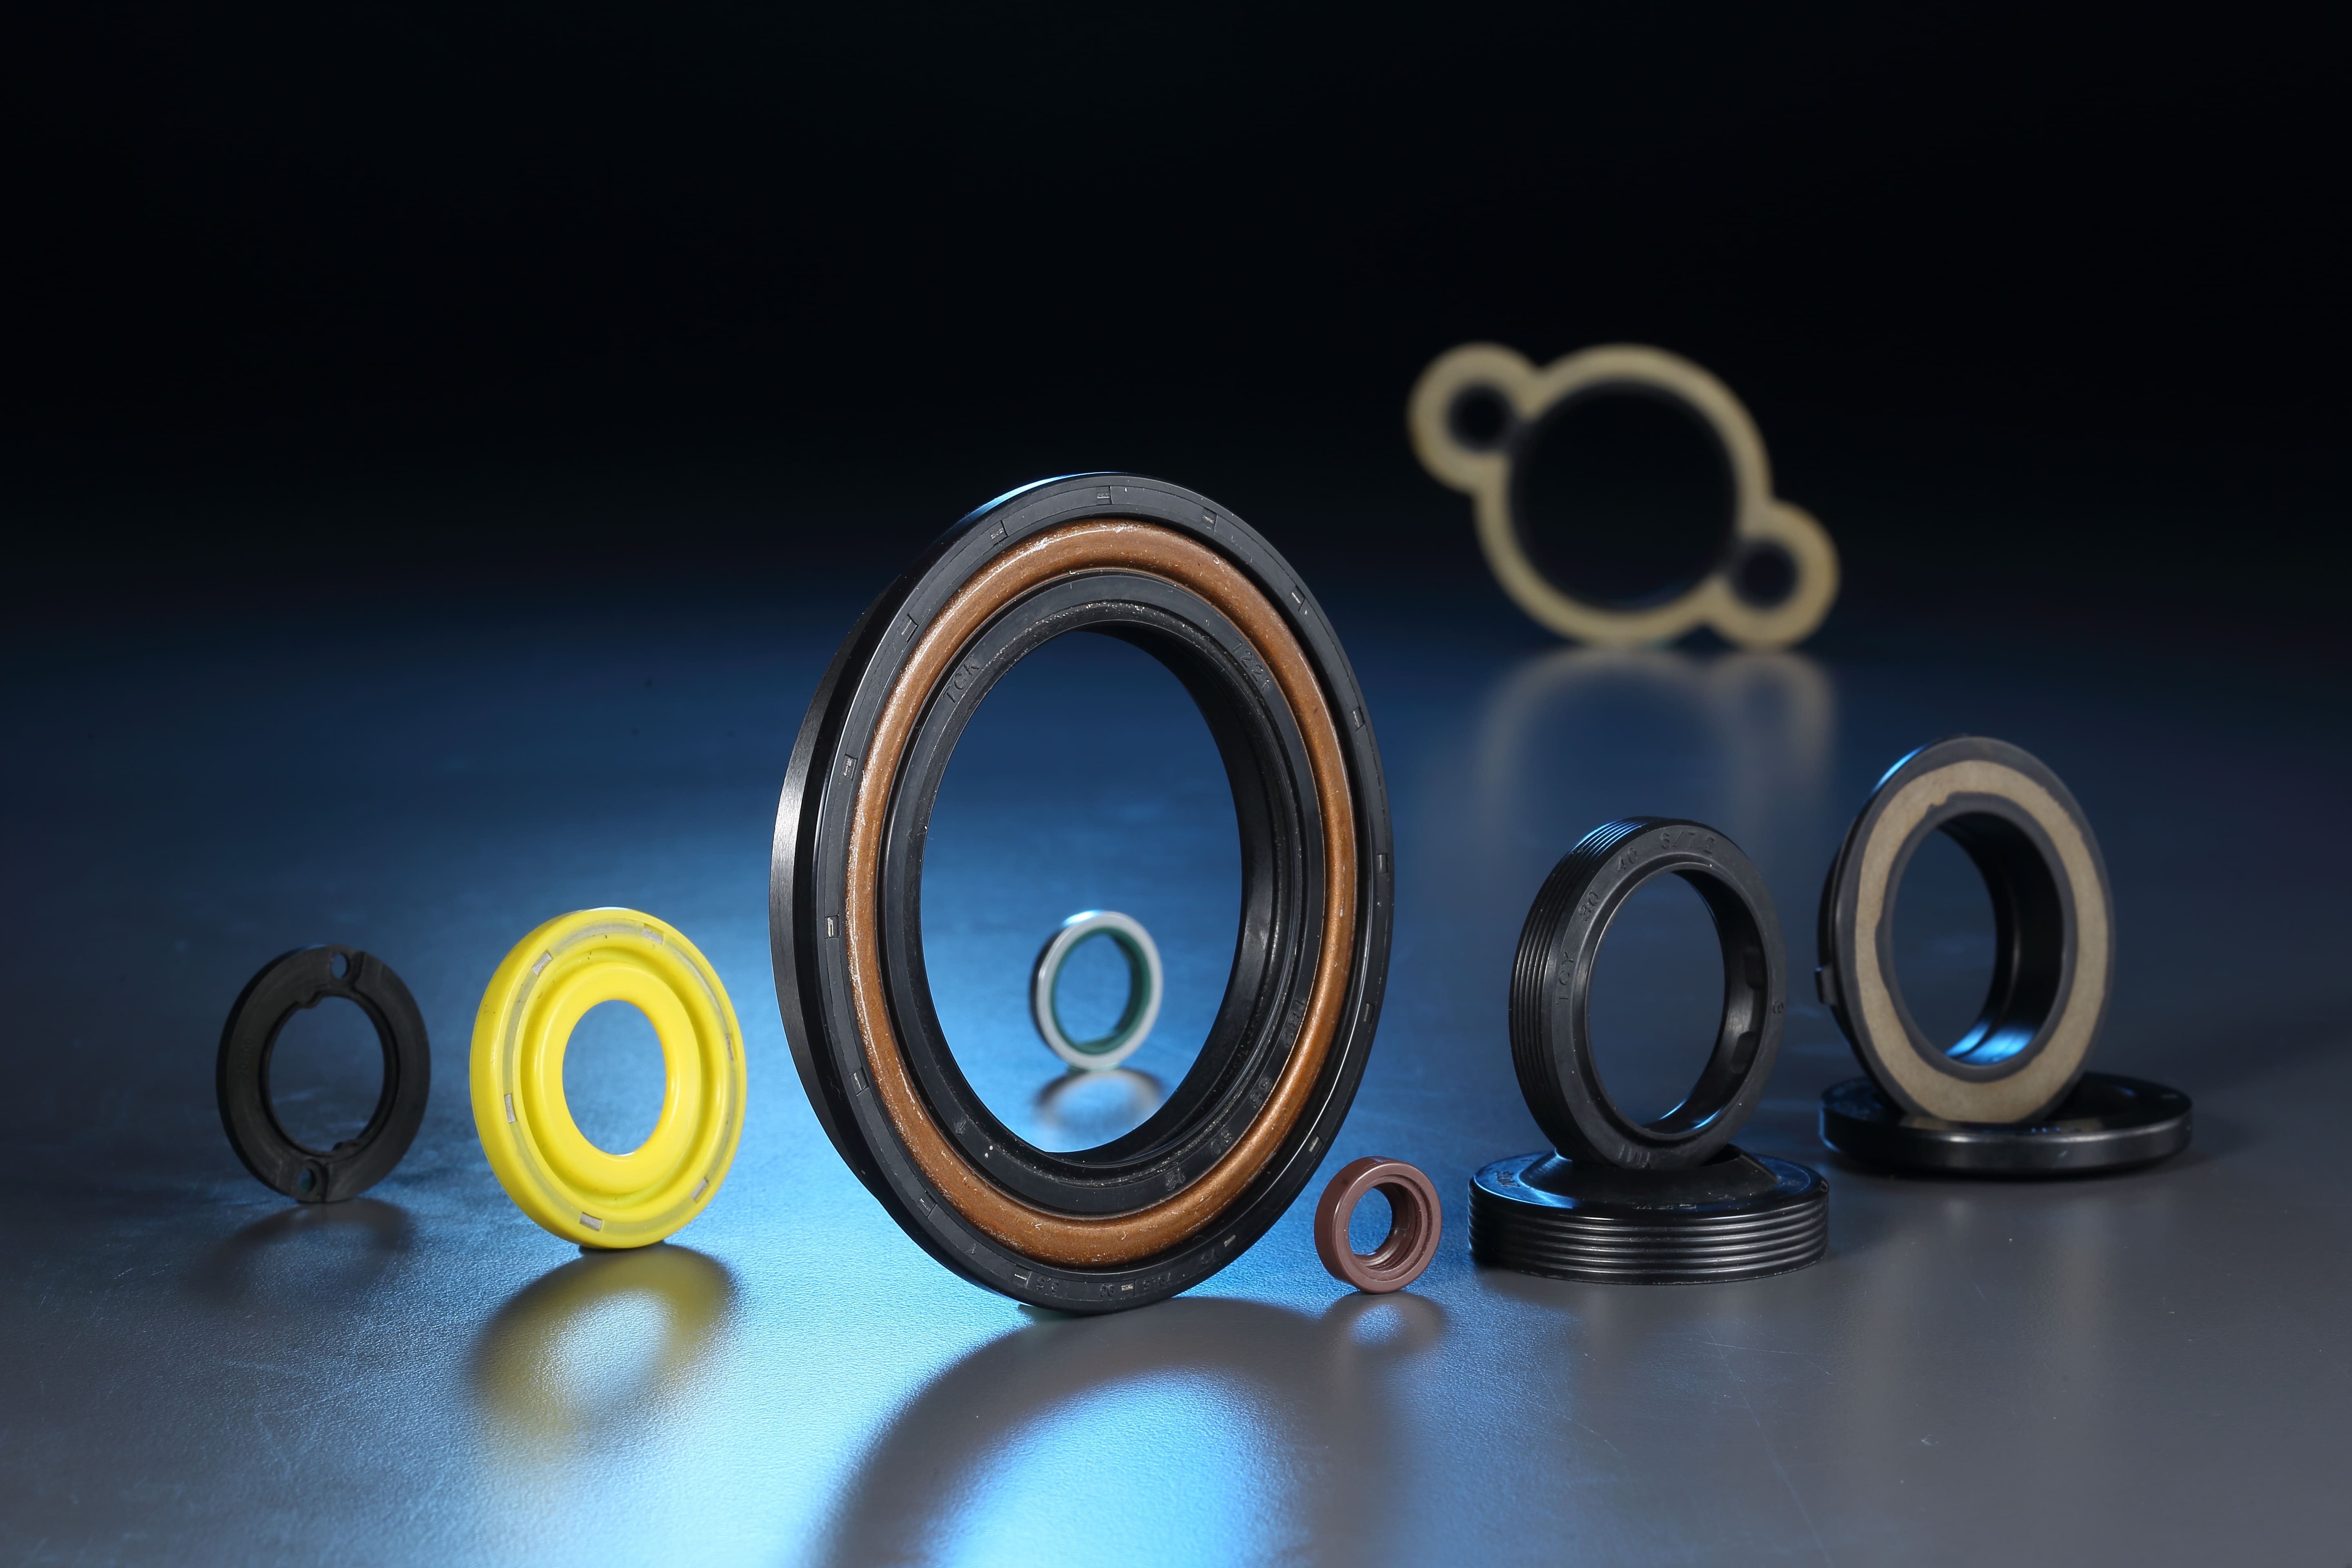 Bus Oil Seal for Rubber, Plastic Parts made by Yee Ming Ying Co., LTD.　昱銘穎有限公司 - MatchSupplier.com